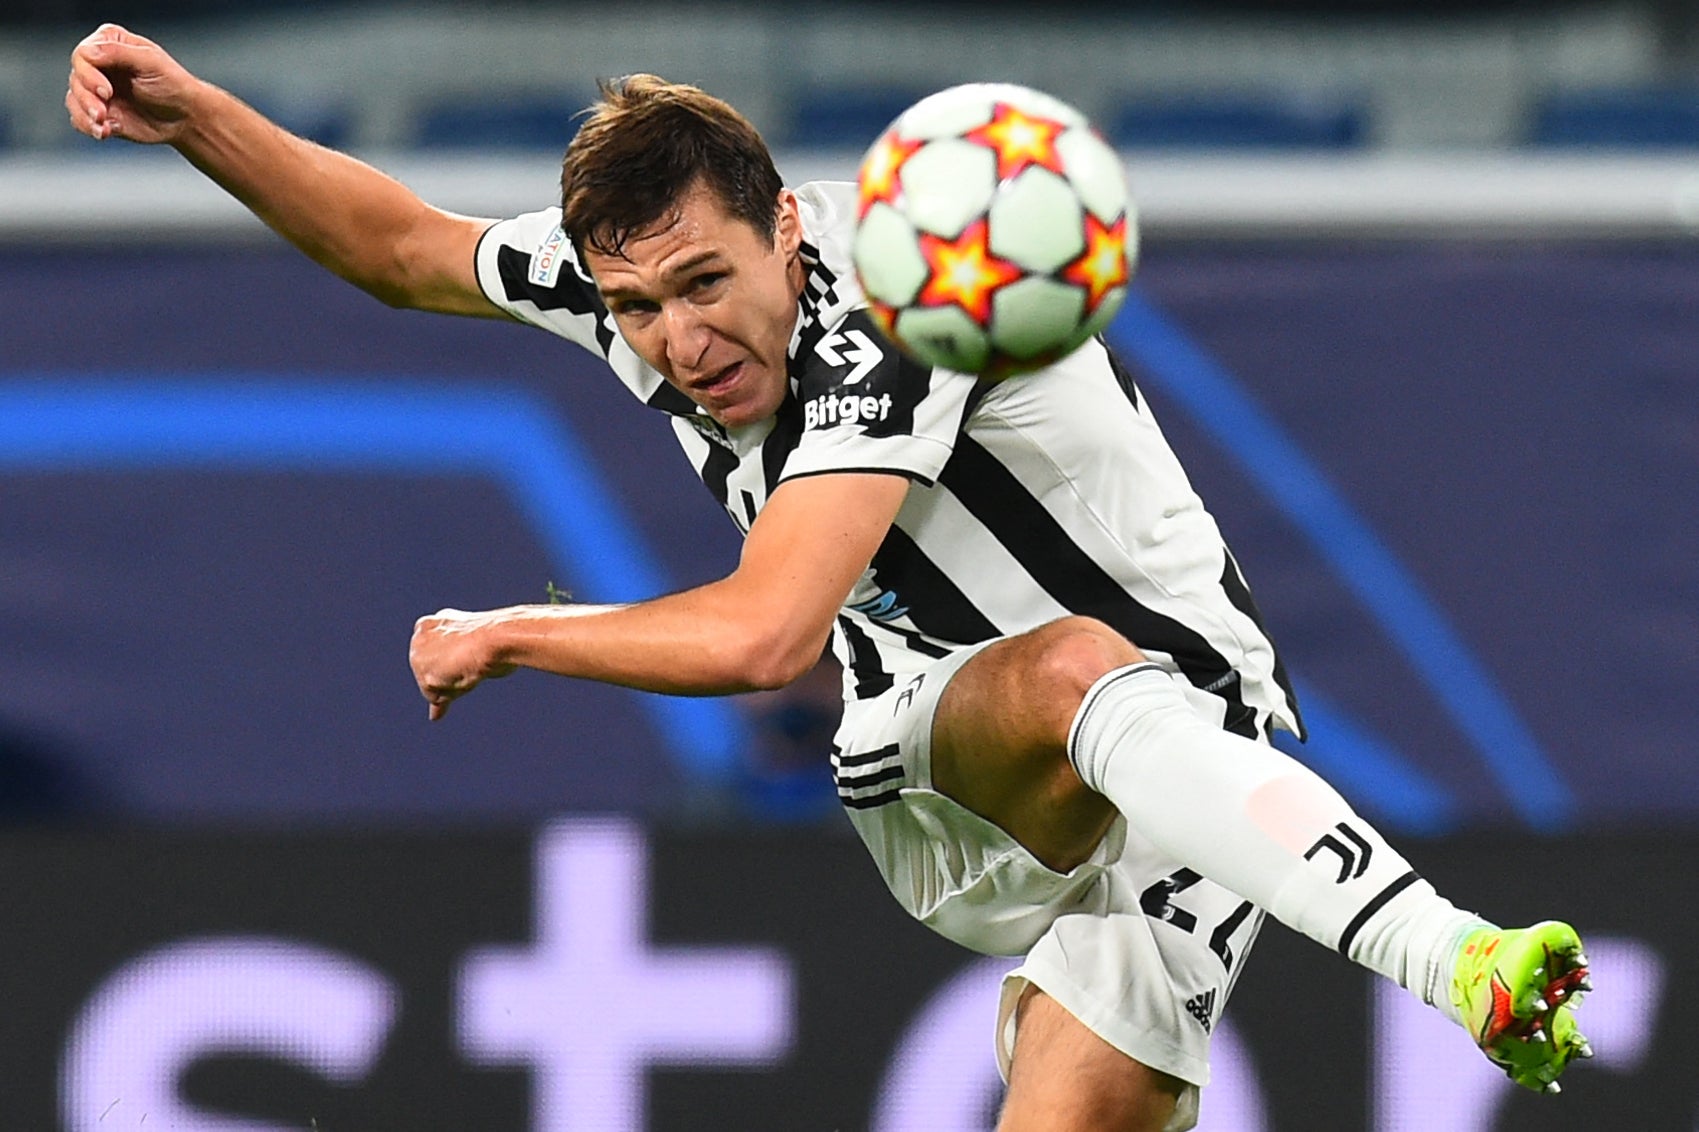 Federico Chiesa shoots the ball during the Champions League match against Zenit